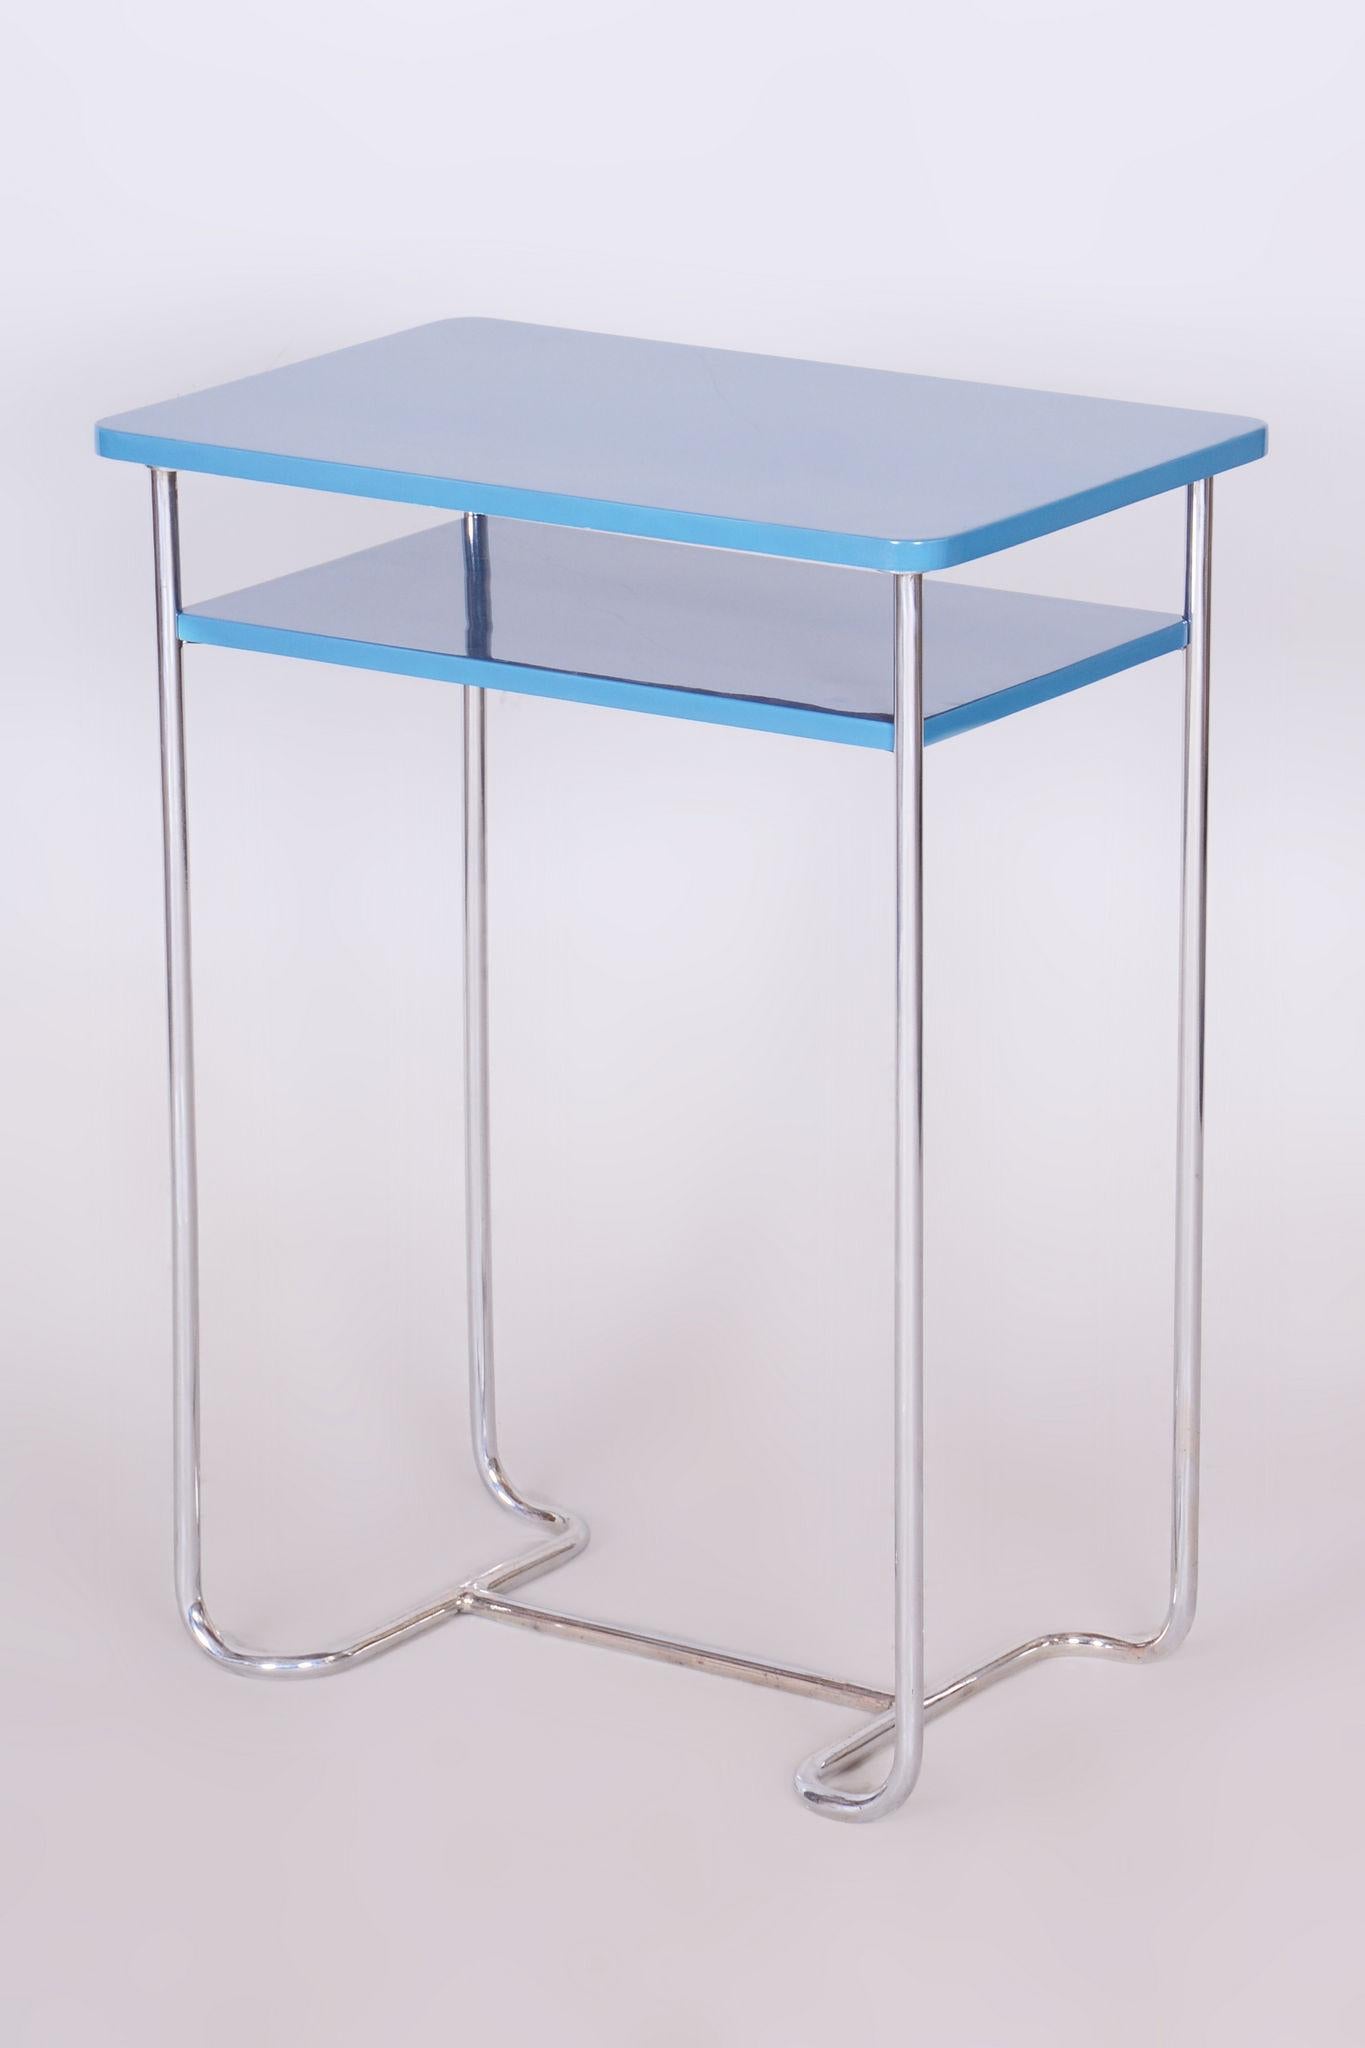 Mid-20th Century Restored Blue Side Table, by Mücke-Melder, Chrome-Plated Steel, Czech, 1930s For Sale